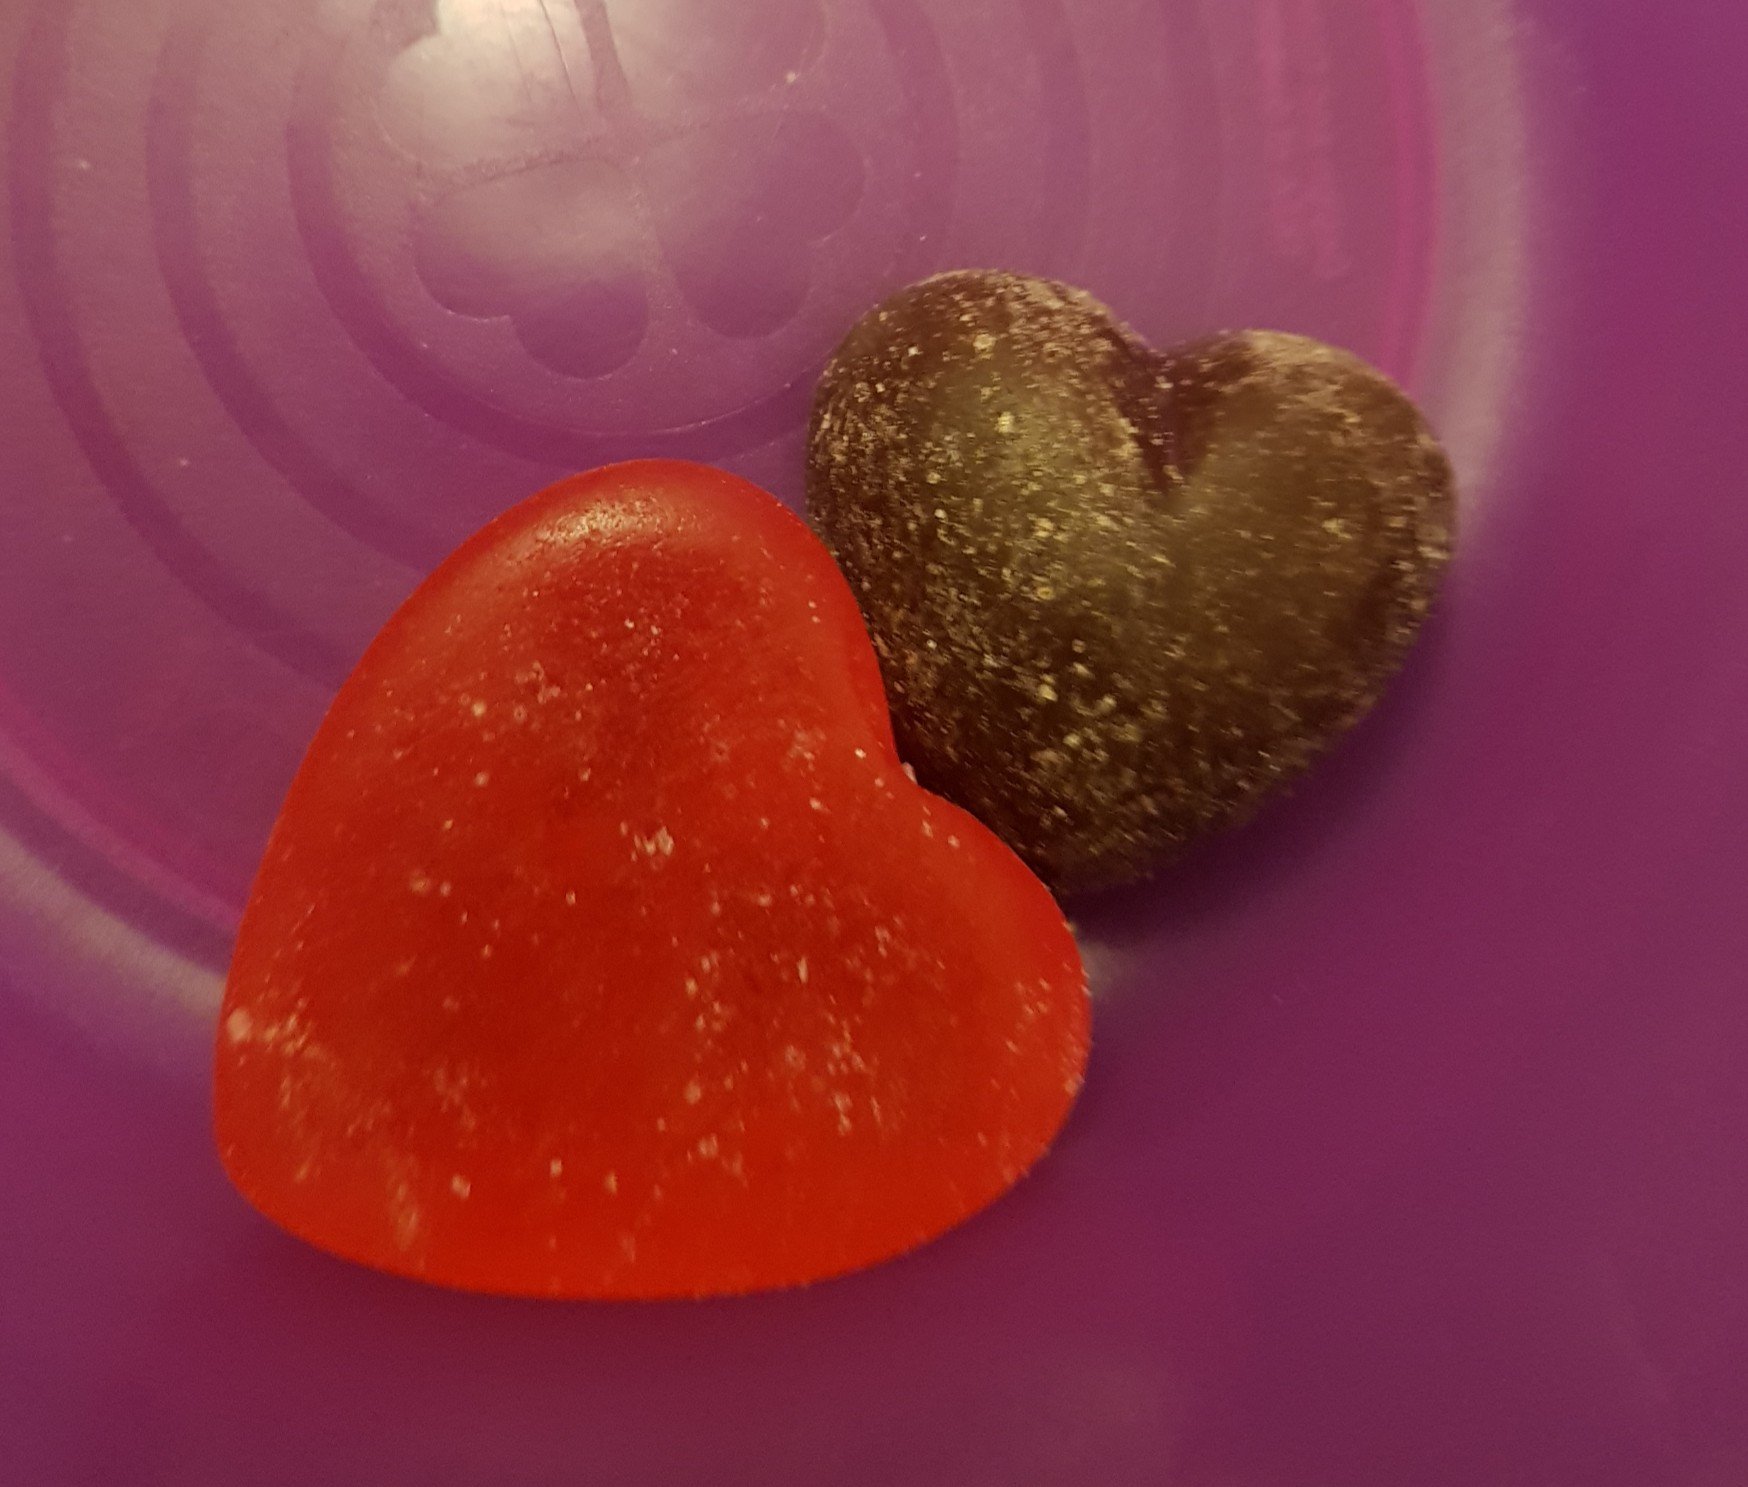 Two hearts - one sweet and one chocolate - in a bowl.